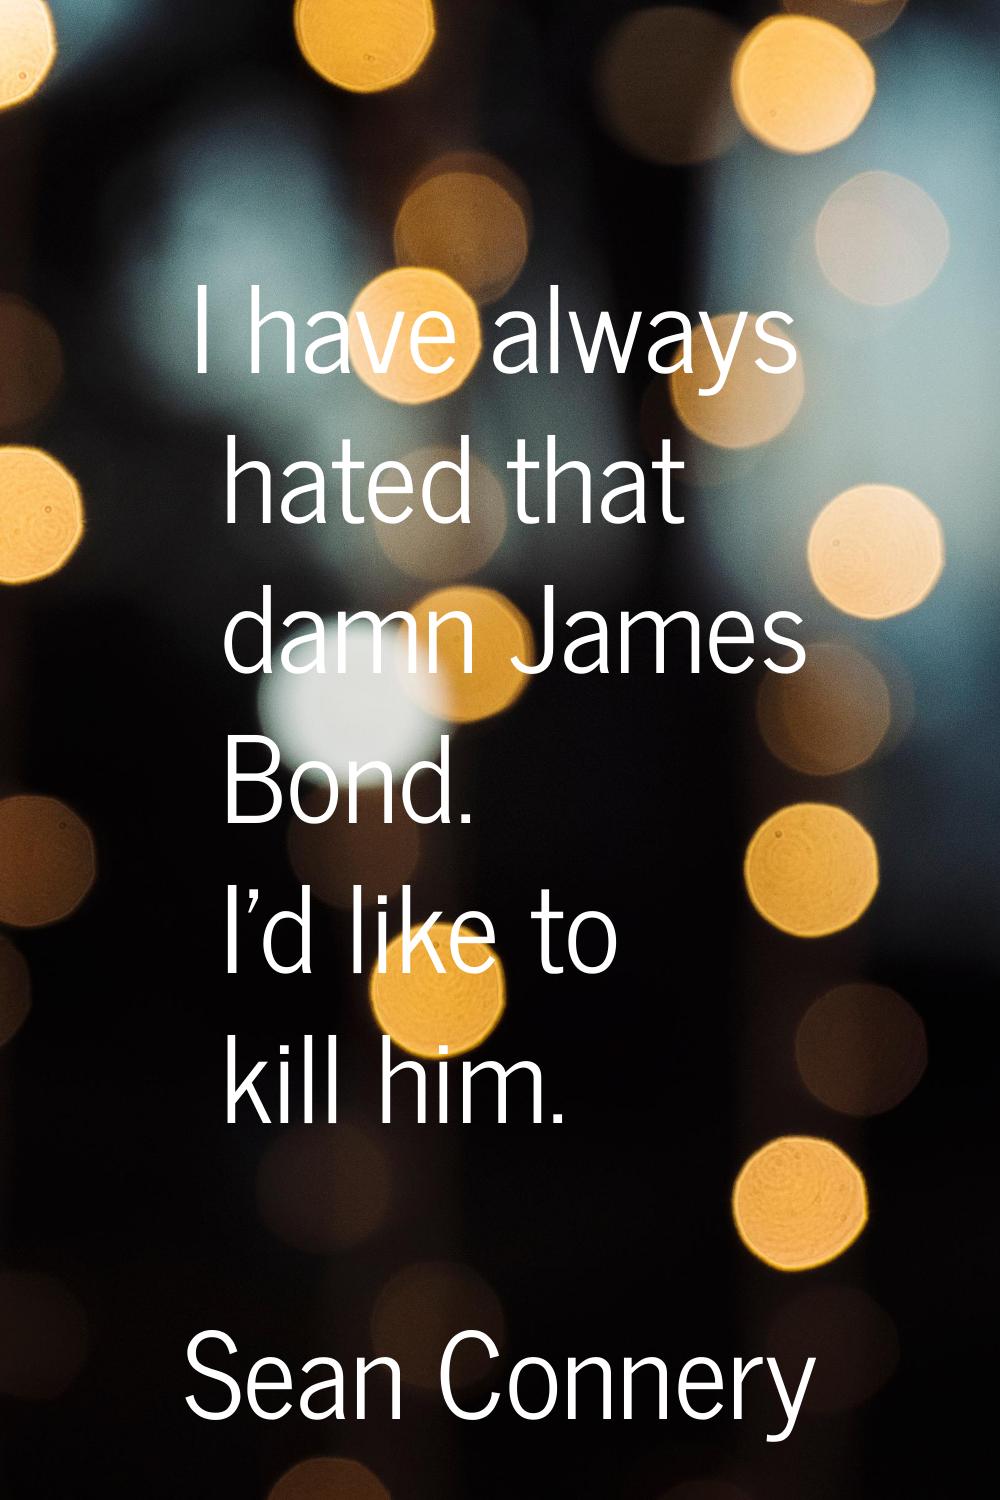 I have always hated that damn James Bond. I'd like to kill him.